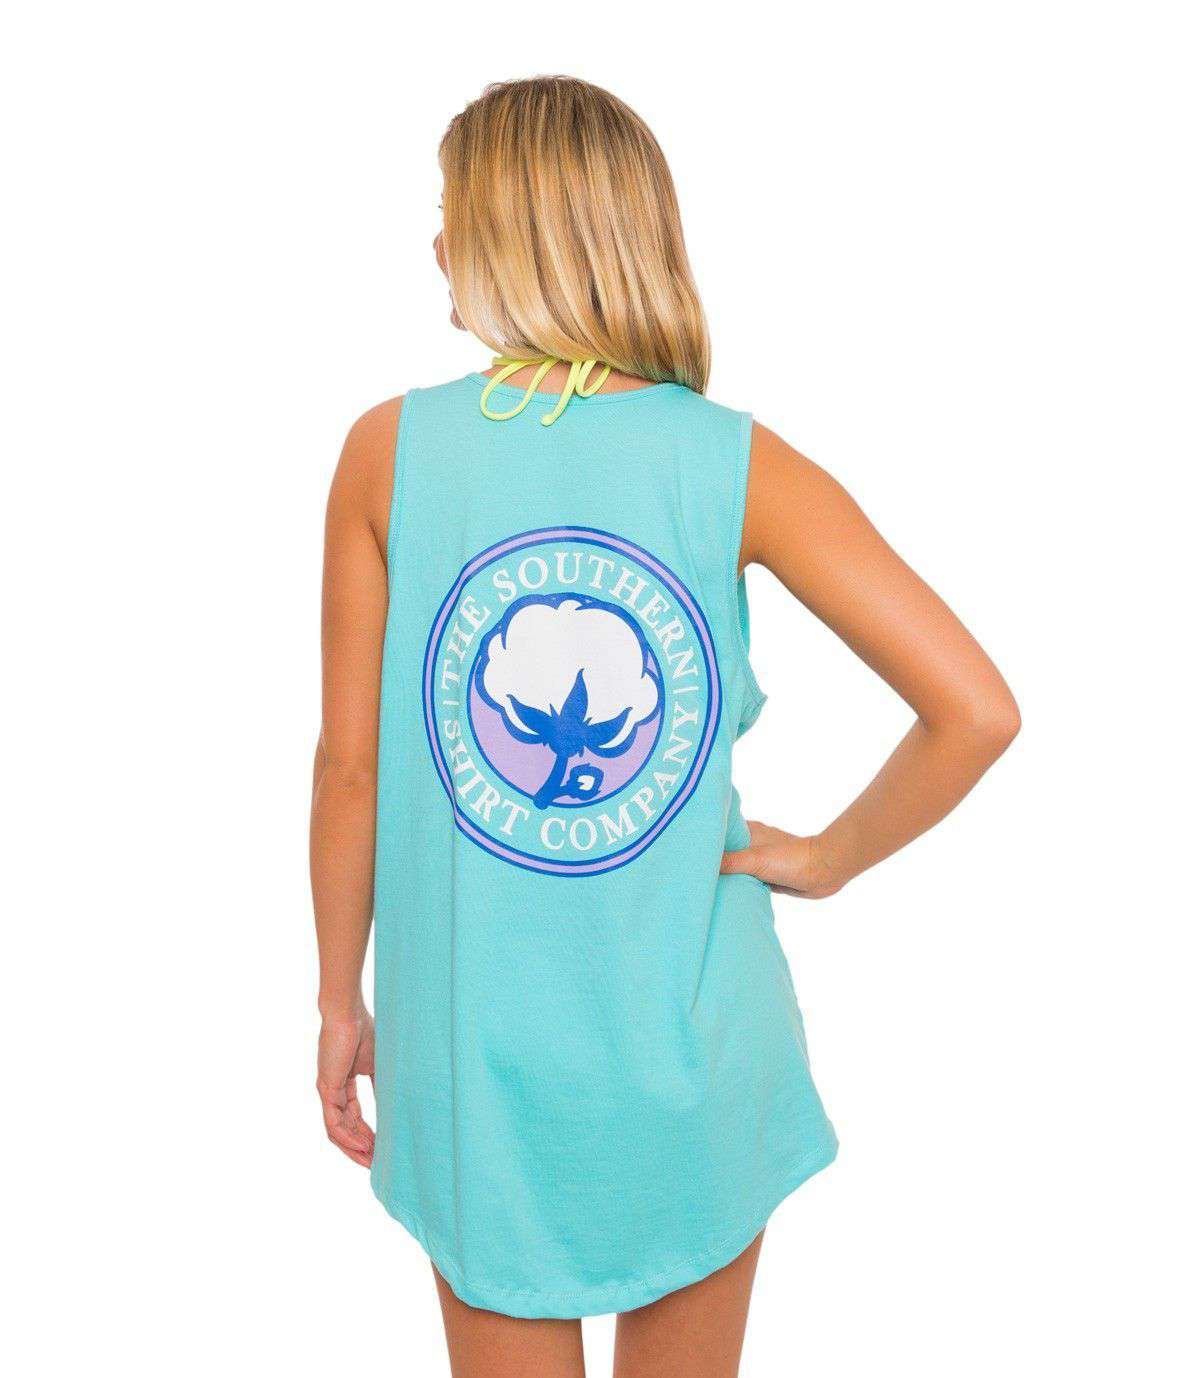 Jenny Tank in Blue Radiance by The Southern Shirt Co. - Country Club Prep